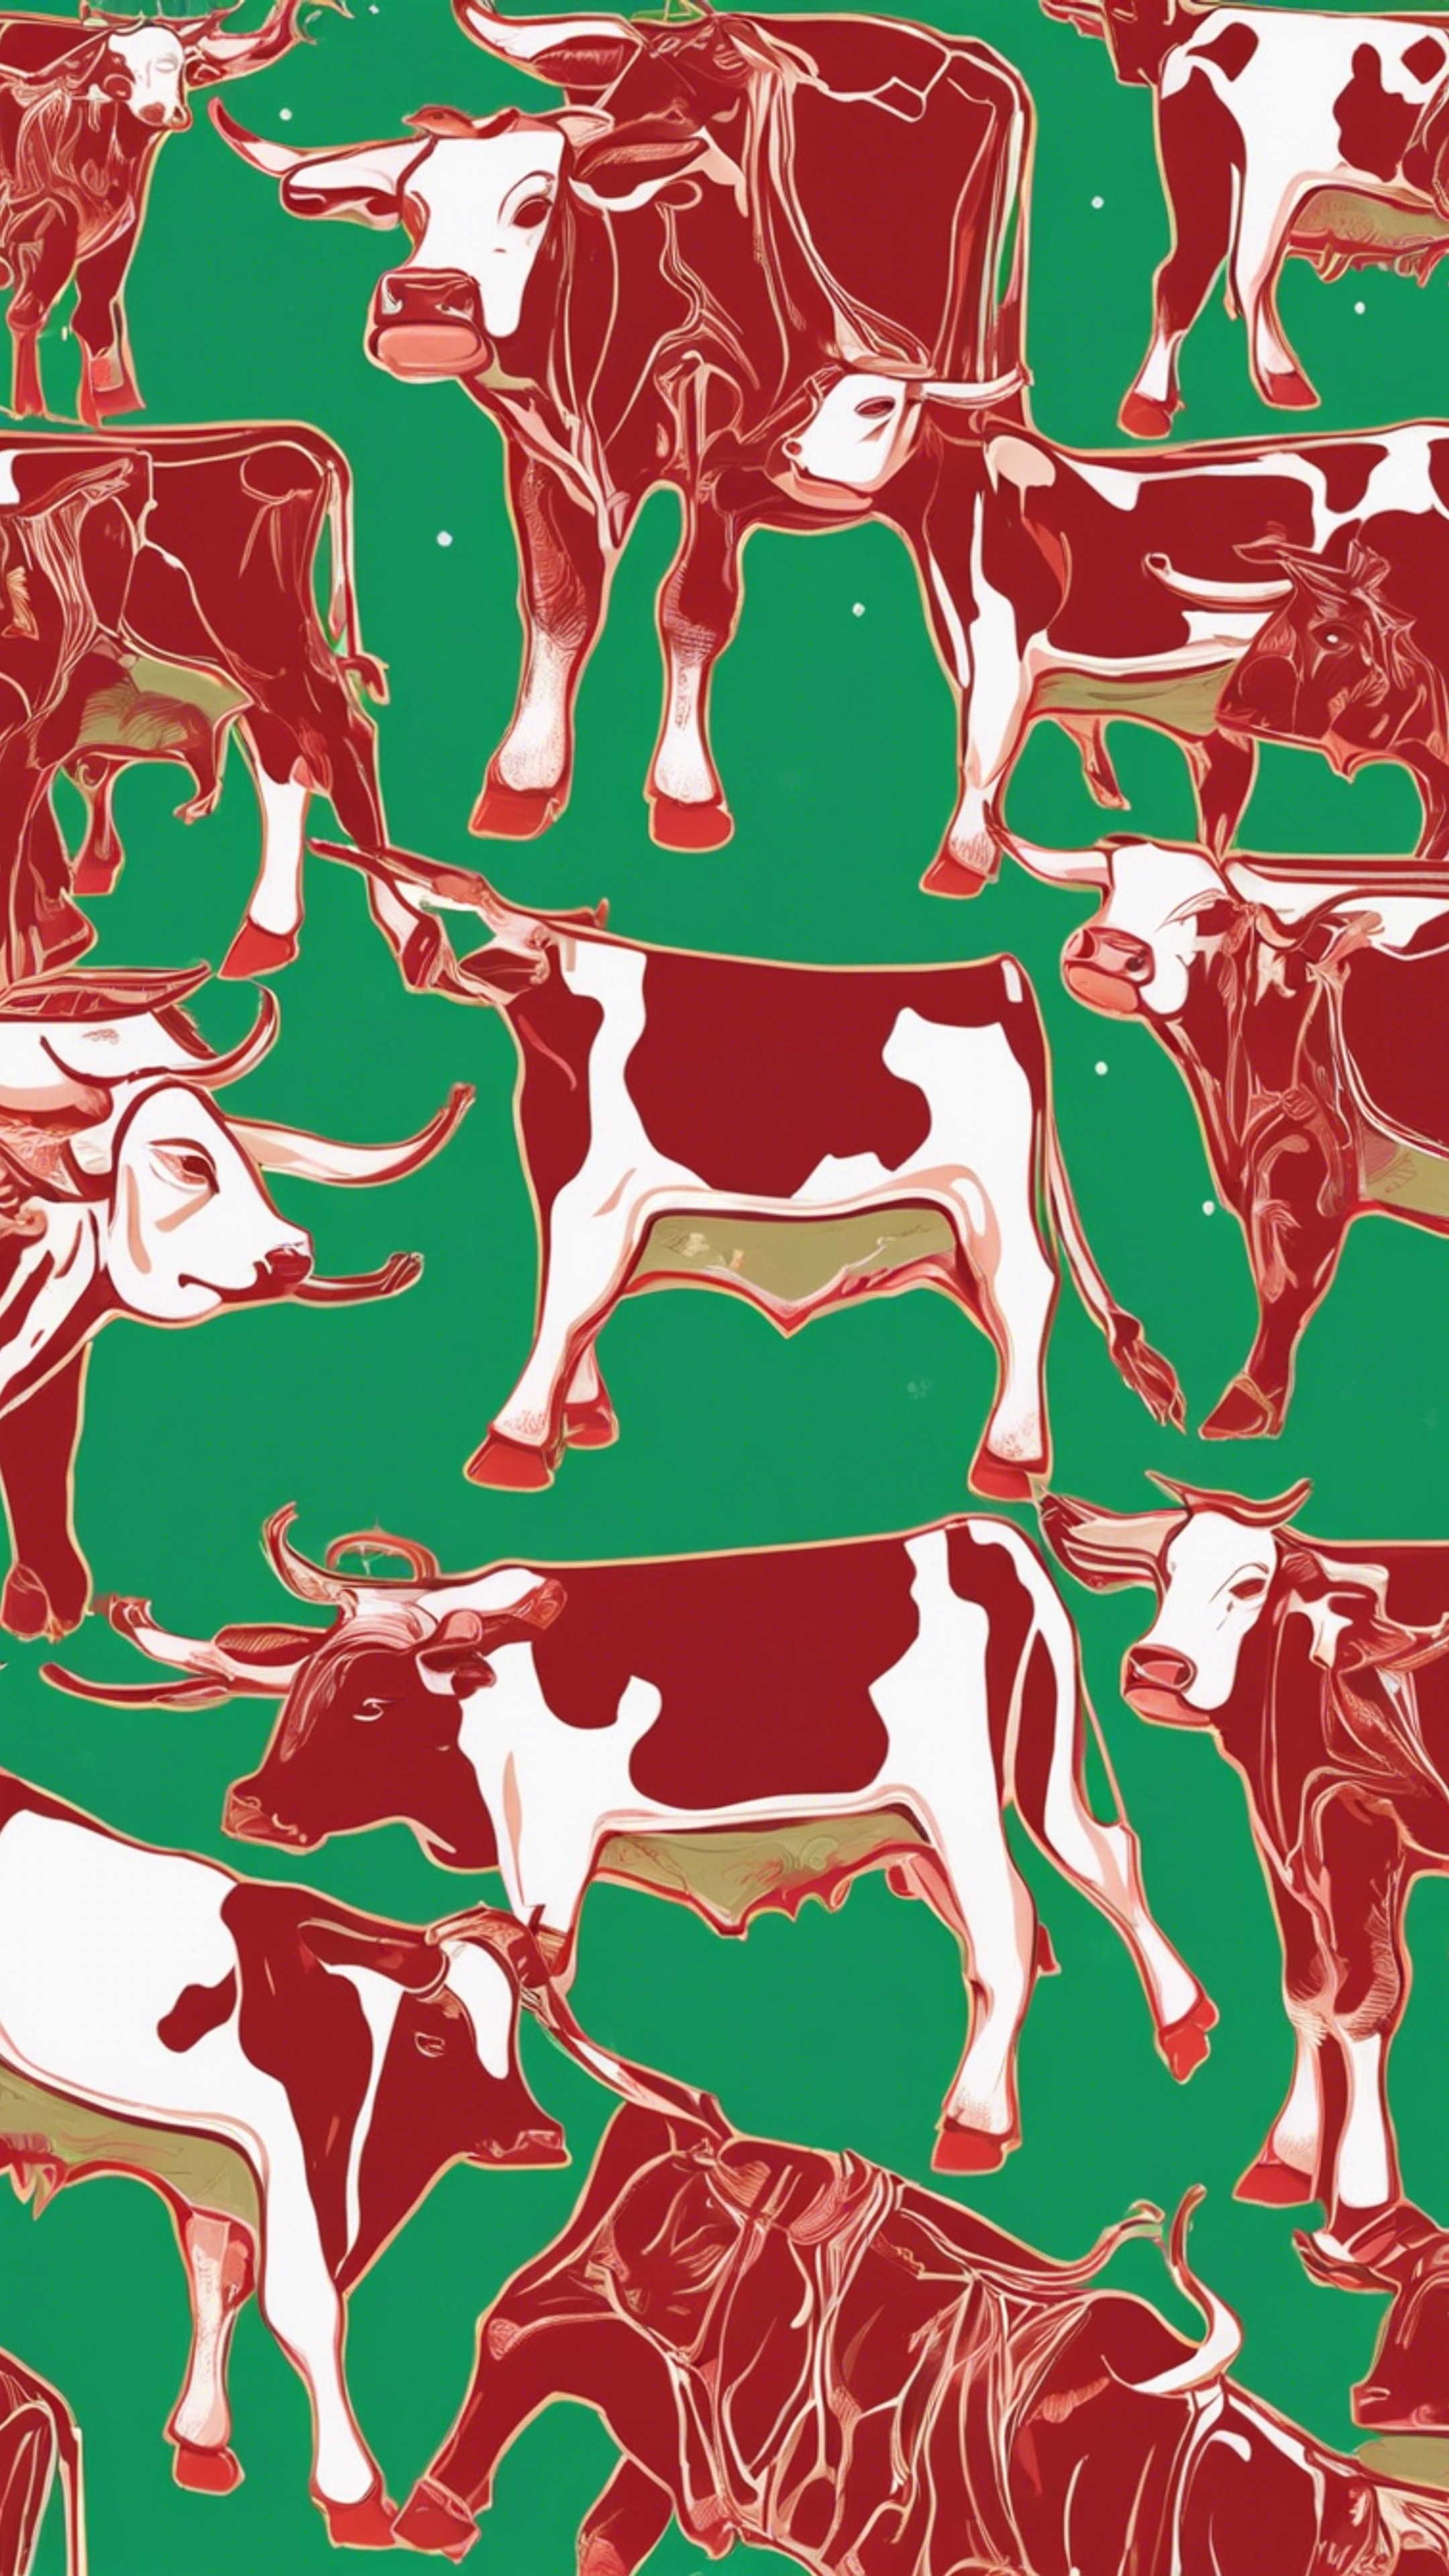 An abstract art featuring earthy green and vibrant red cow patterns. Wallpaper[bce8b500f11040f088c2]